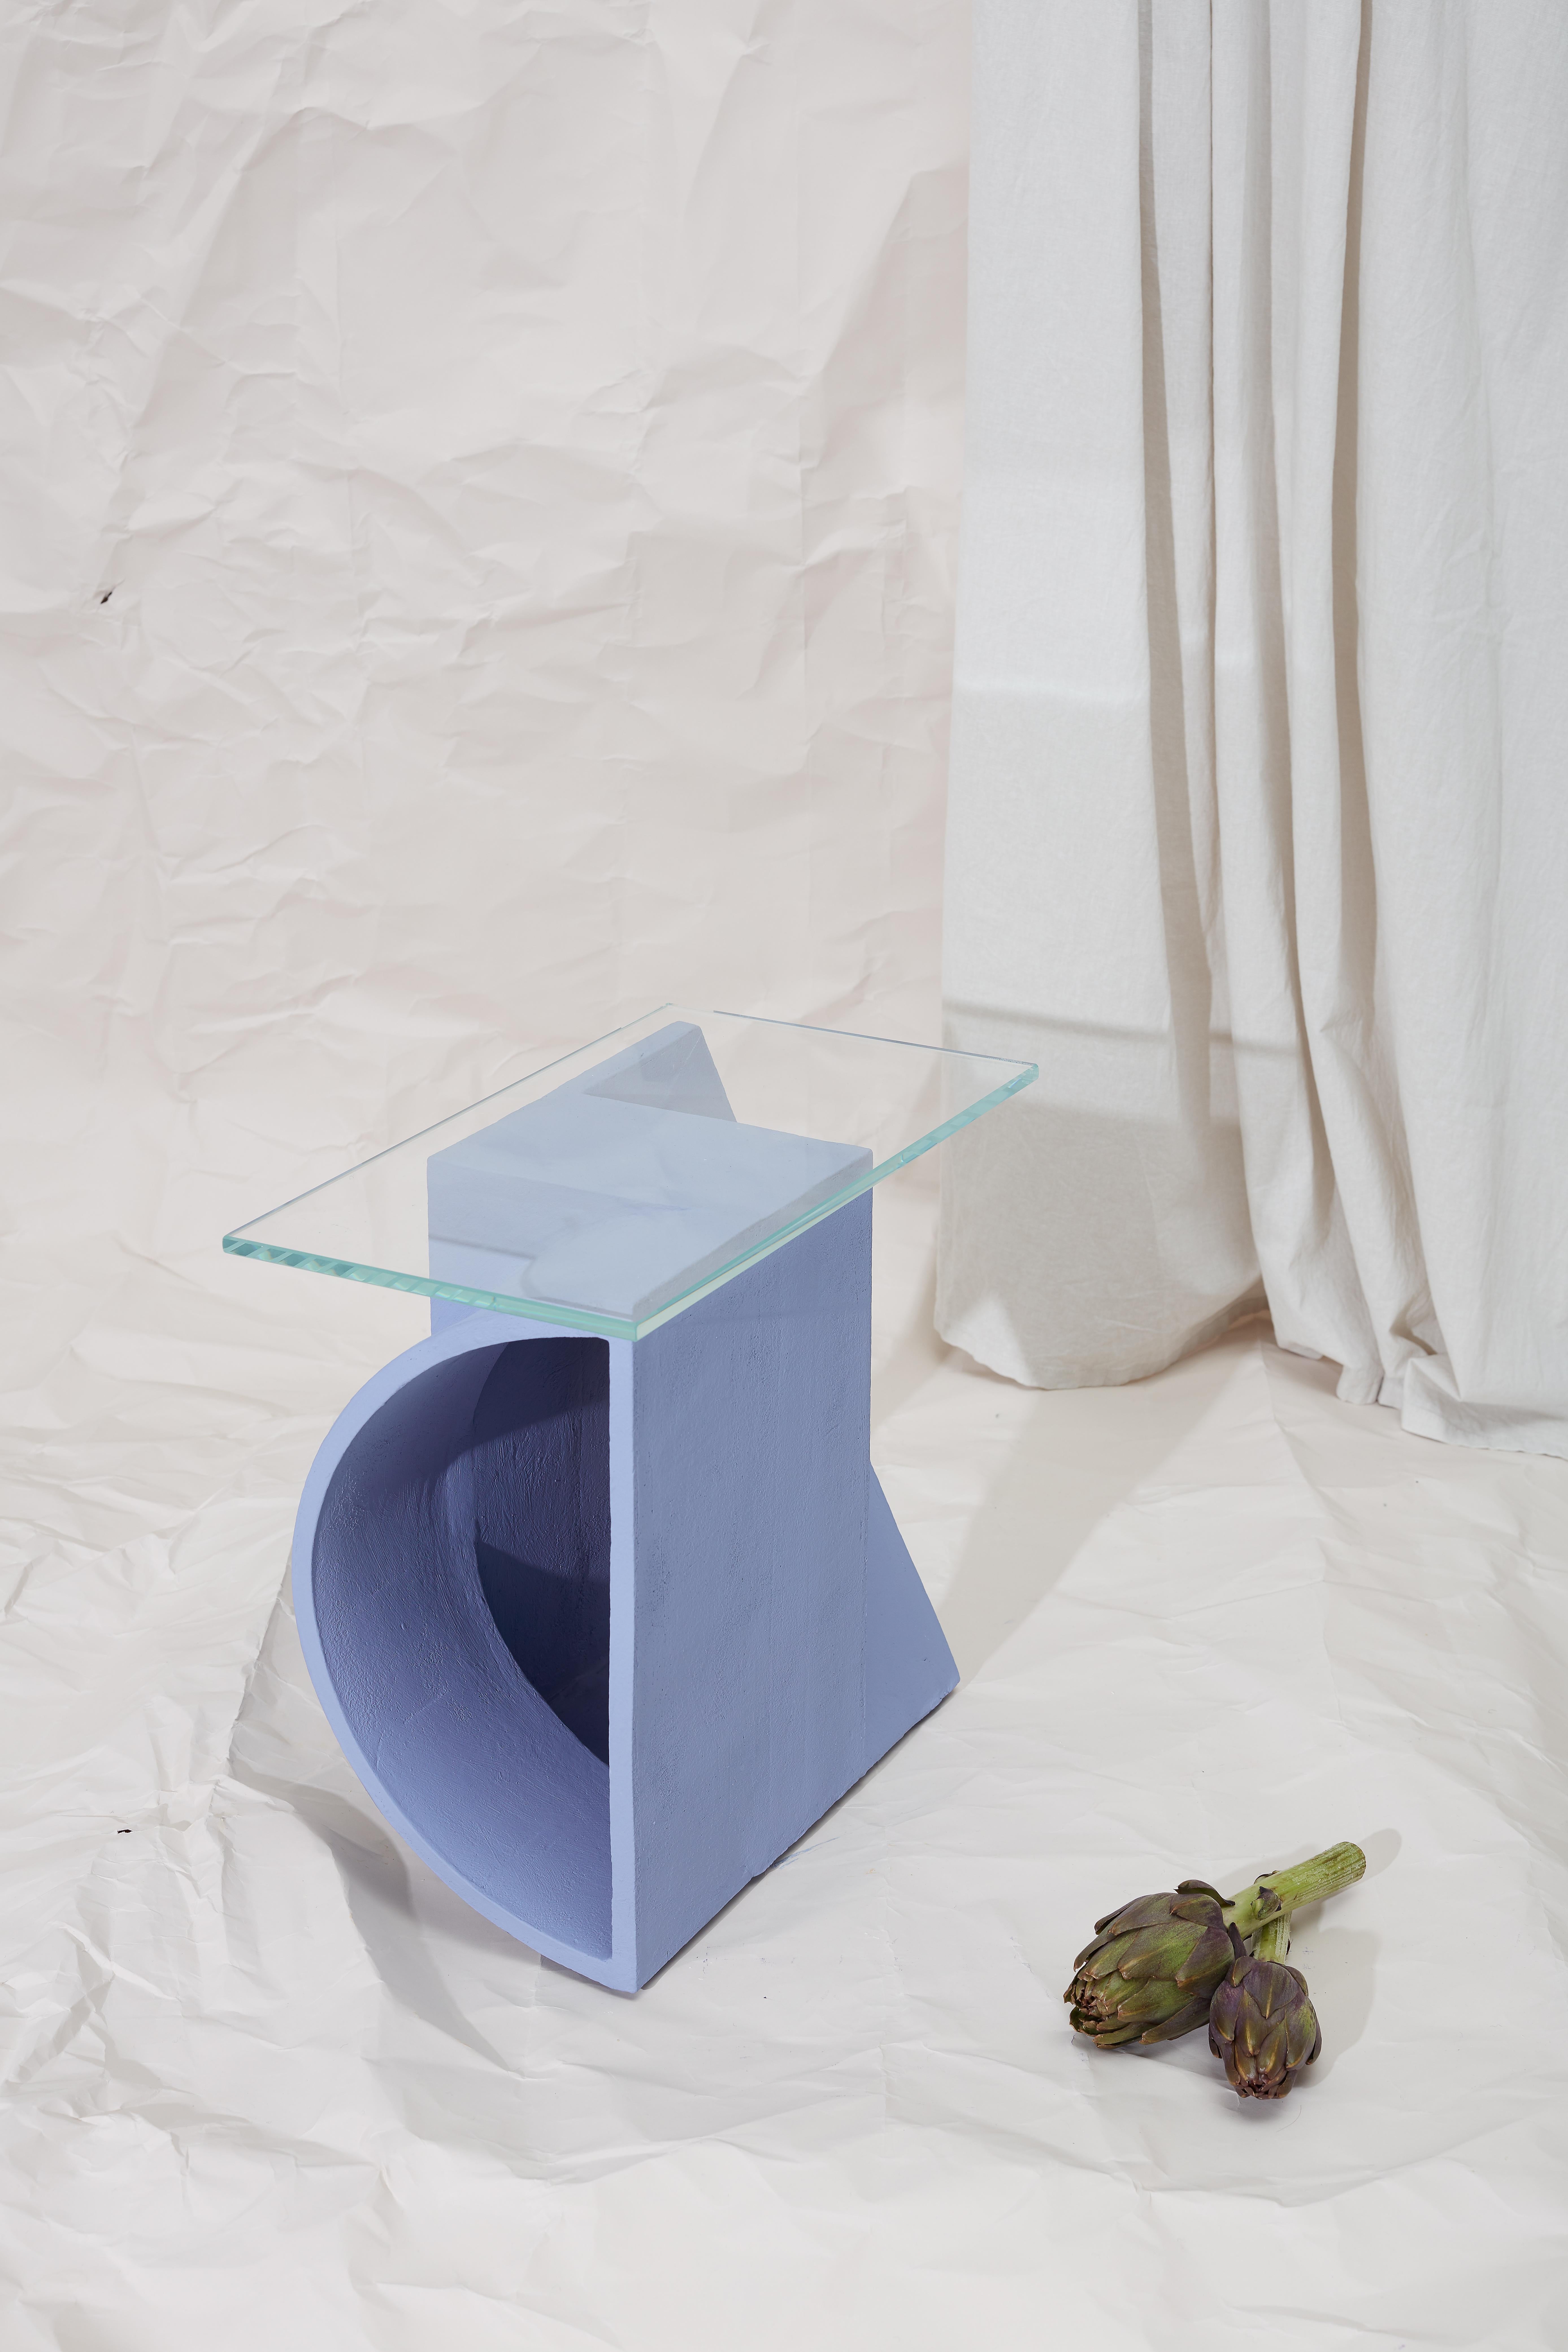 Ceramic side table by Theodora Alfredsdottir
Unique
Materials: Blue stoneware, clear glass
Dimensions: 40 x 40 x 20 cm
 Glass 25 x 44 x 0.6 cm 

A collection of ceramic side tables that explore the possibility of using a single mould to